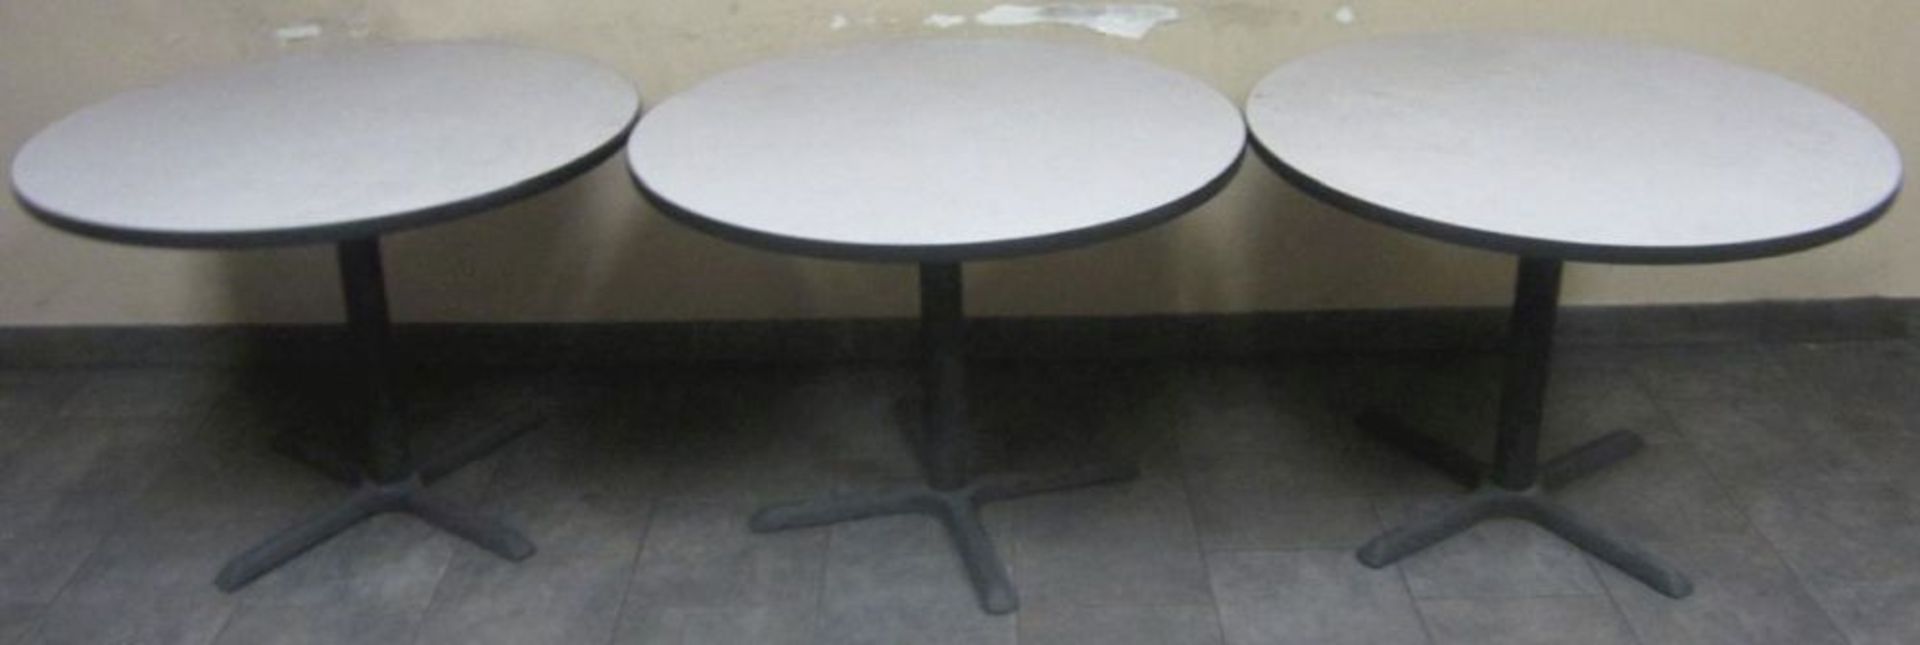 3) 42" ROUND TABLES W/ STACKING CHAIRS IN 2 STACKS